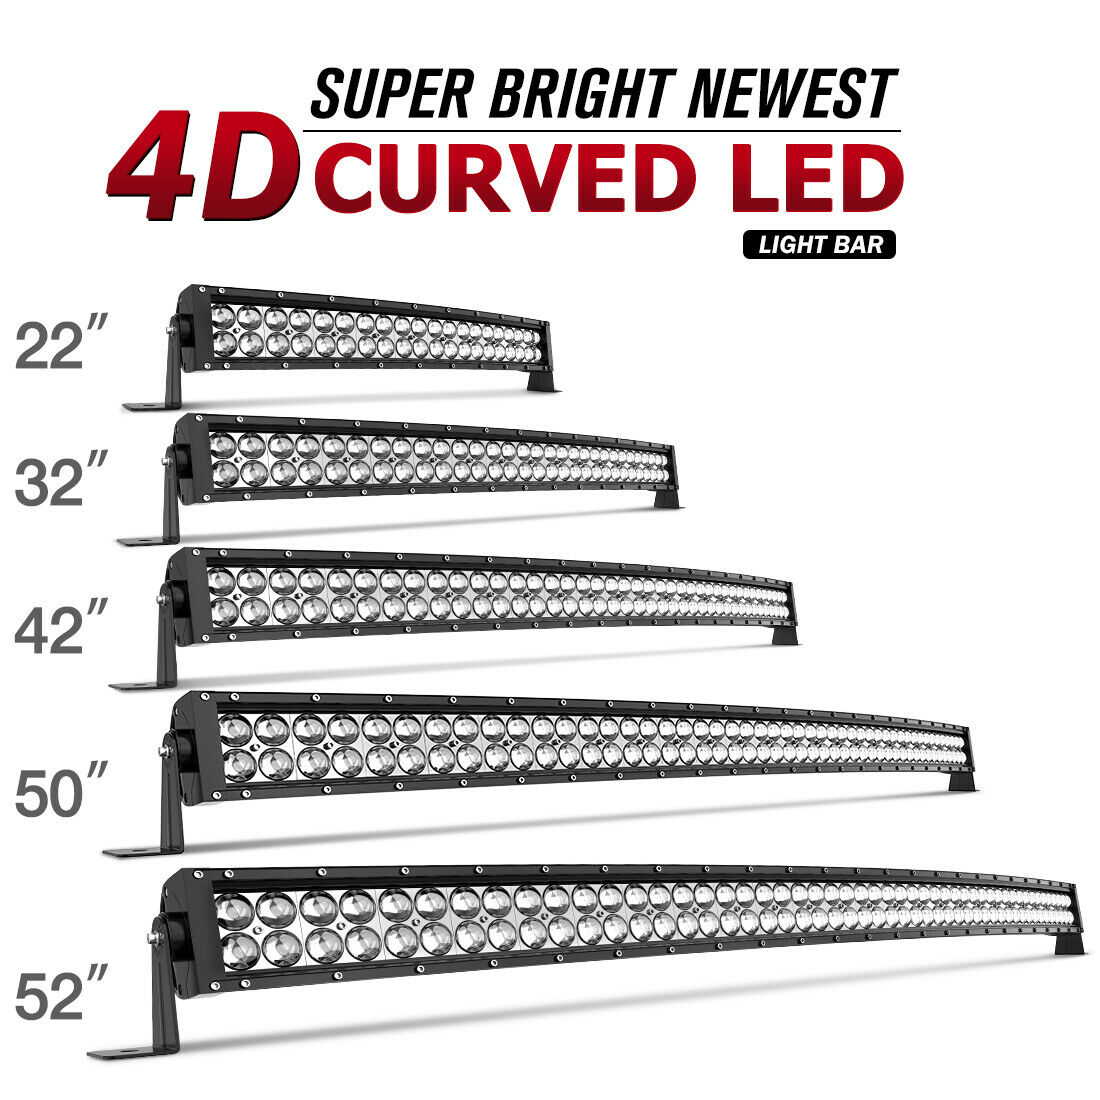 52/50/42/32/22inch Curved Led Light Bar Driving Truck Suv Boat Offroad 672w/700w